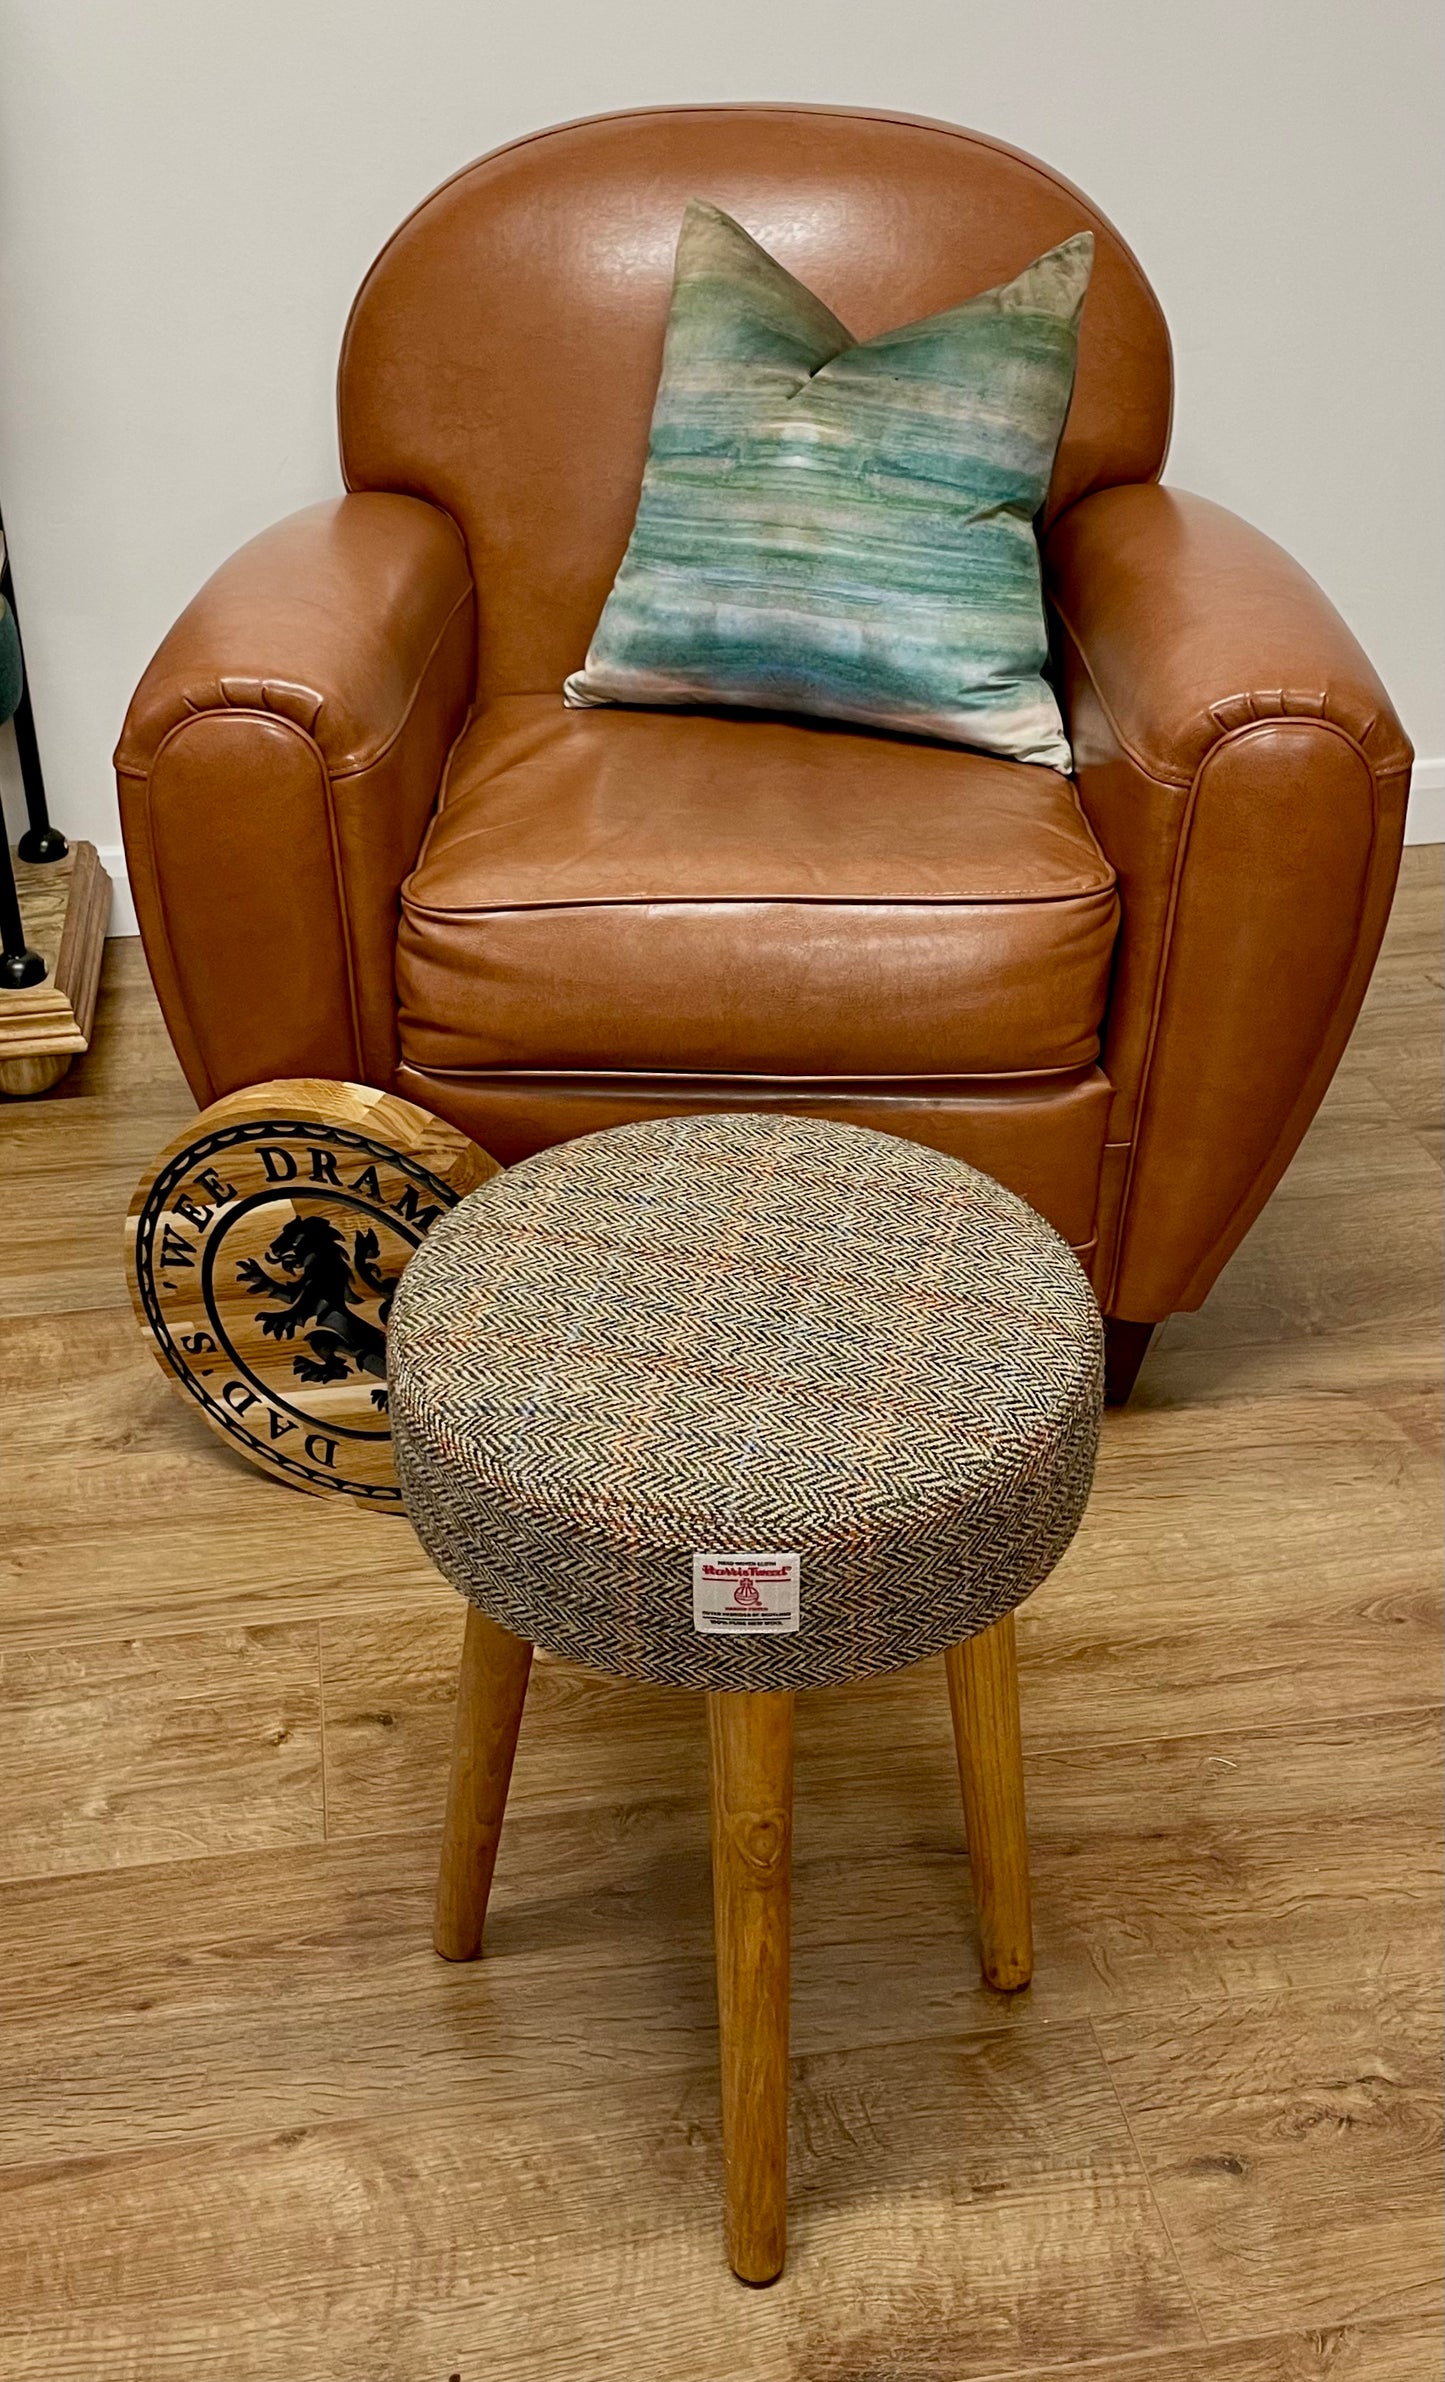 Dad’s ‘Wee Dram’ Table Footstool with Harris Tweed - Small